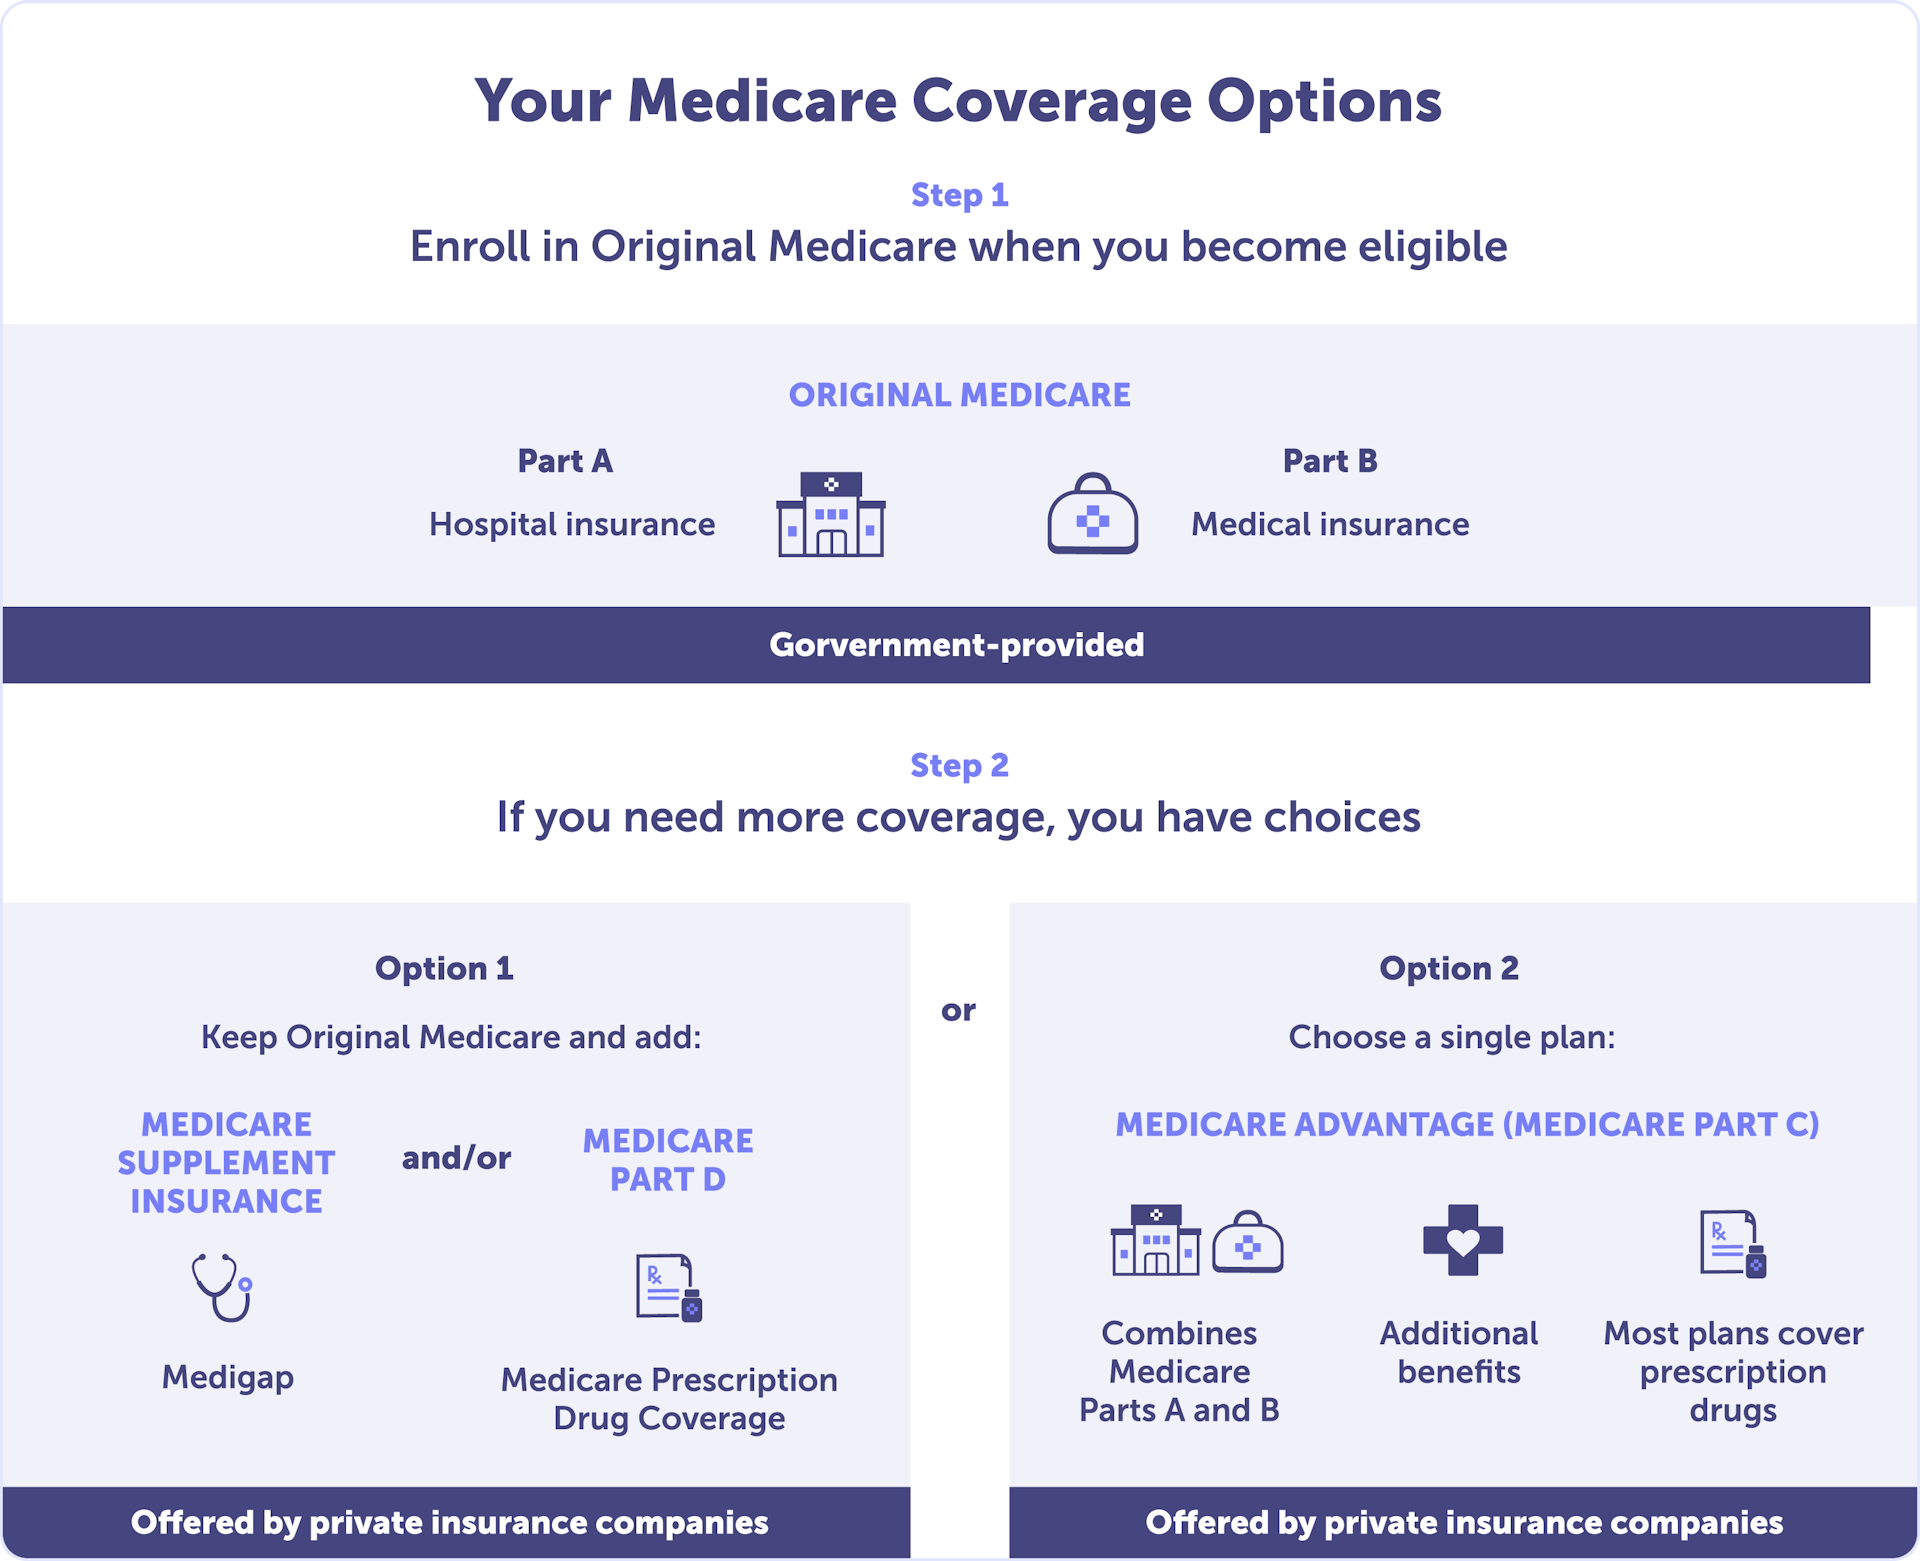 Image showing Medicare coverage options based on individual needs